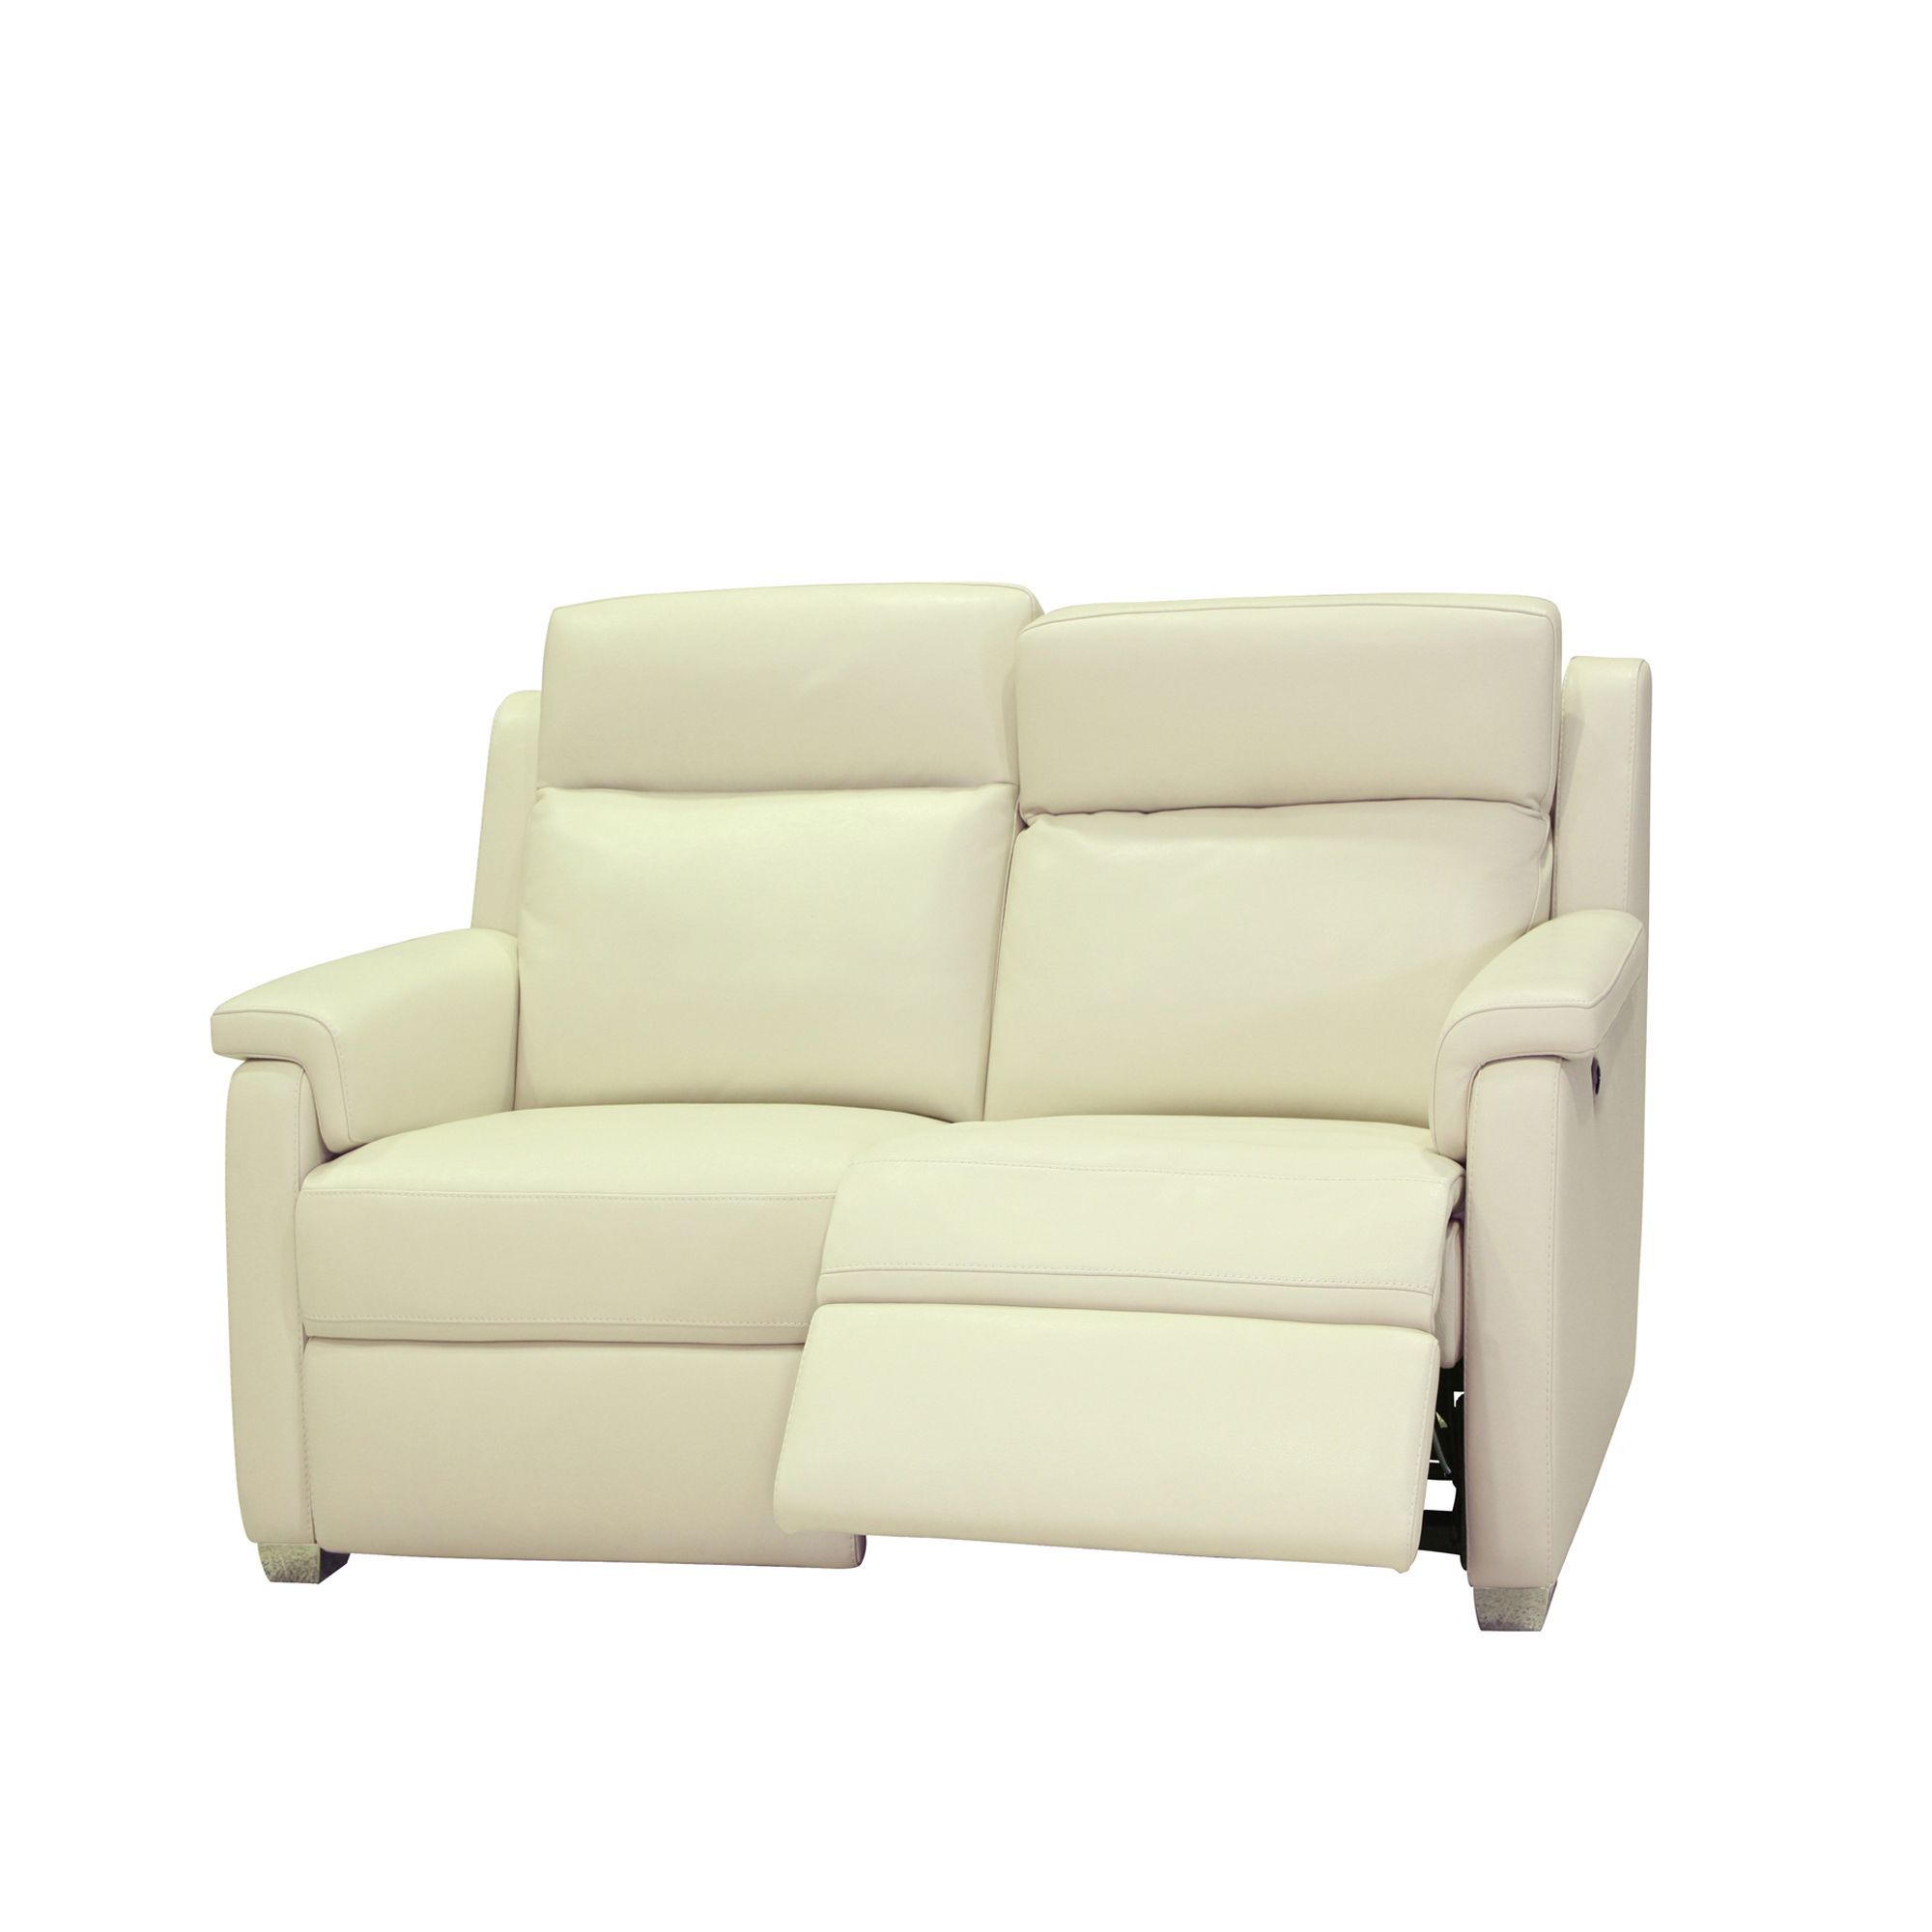 Cookes Collection Victoria 2 Seater Manual Recliner Sofa Living